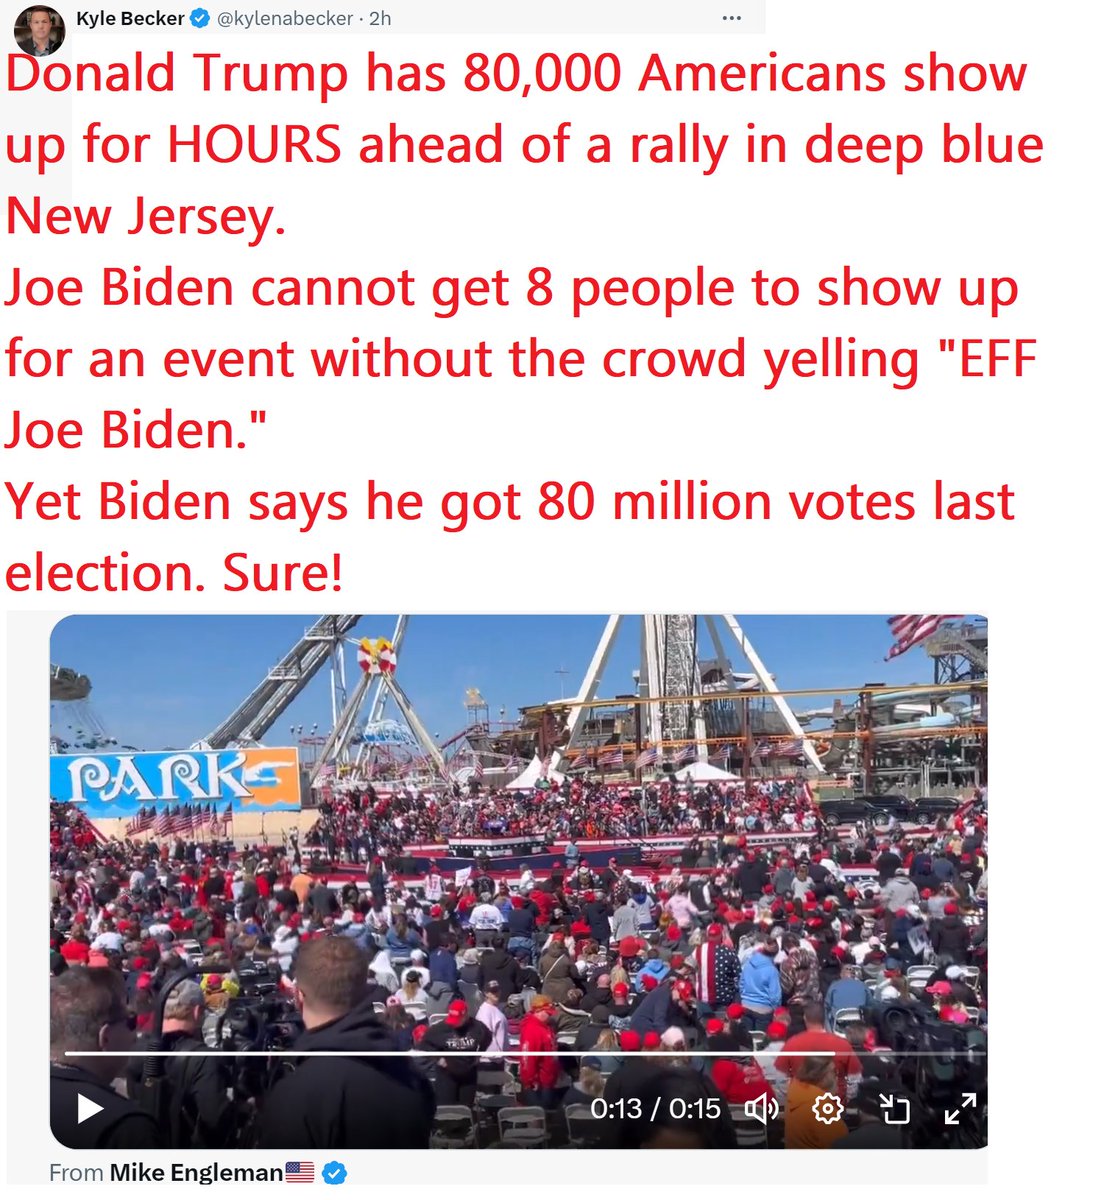 🇺🇸❤️PATRIOT FOLLOW TRAIN❤️🇺🇸 🇺🇸❤️HAPPY SATURDAY EVENING !❤️🇺🇸 🇺🇸❤️DROP YOUR HANDLES ❤️🇺🇸 🇺🇸❤️FOLLOW OTHER PATRIOTS❤️🇺🇸 🔥❤️LIKE & RETWEET IFBAP❤️🔥 🇺🇸❤️PRAY FOR TRUMP❤️🇺🇸 Donald Trump has 80,000 Americans show up for HOURS ahead of a rally in deep blue New Jersey. Joe